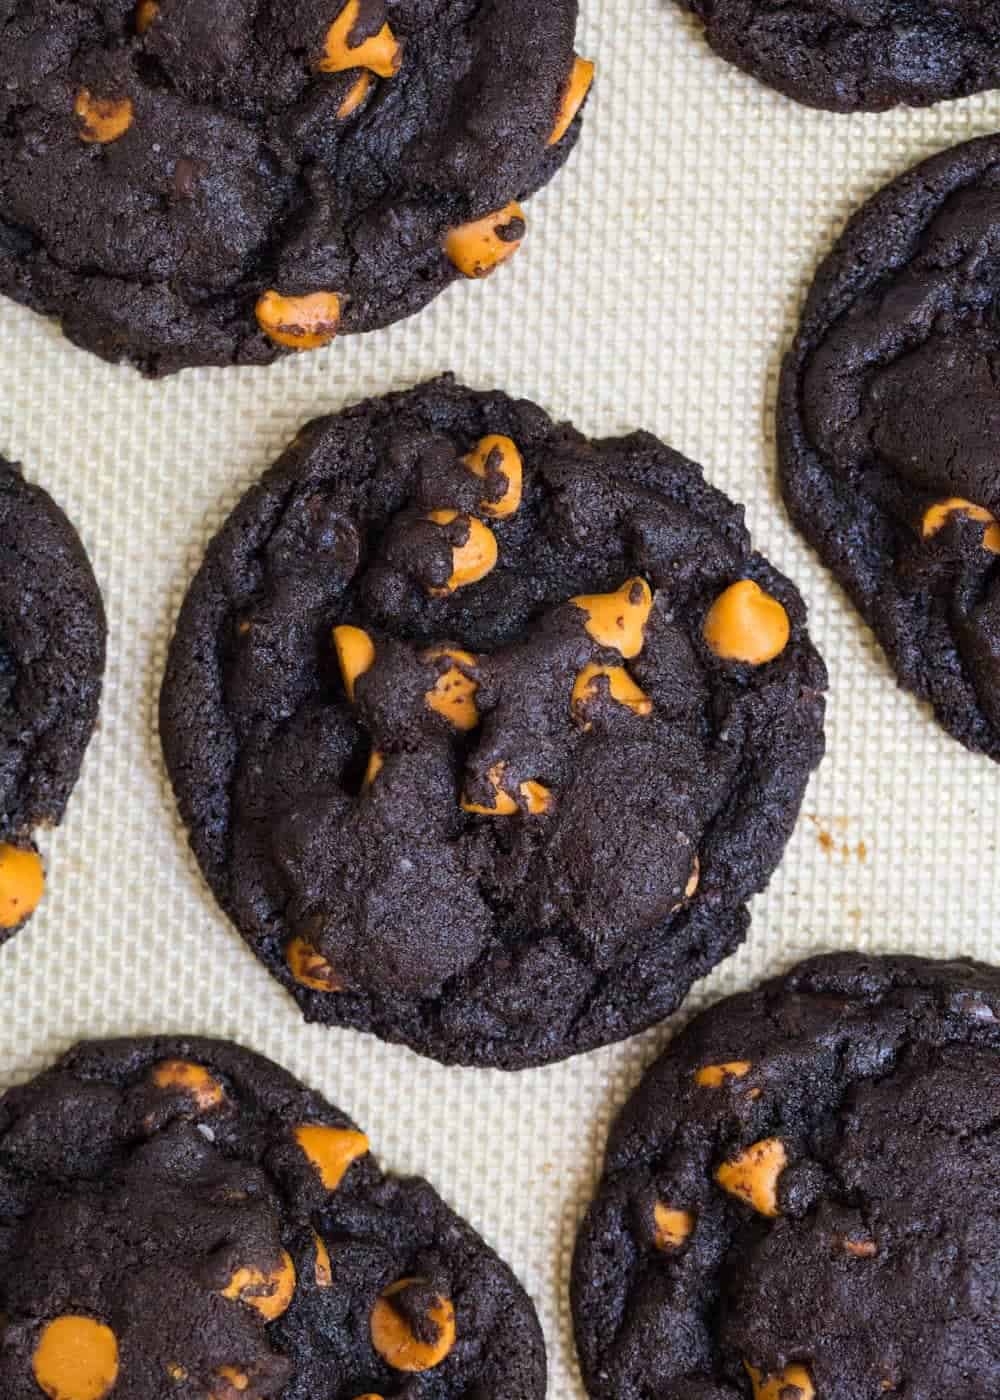 Double chocolate cookies with salted caramel chips.